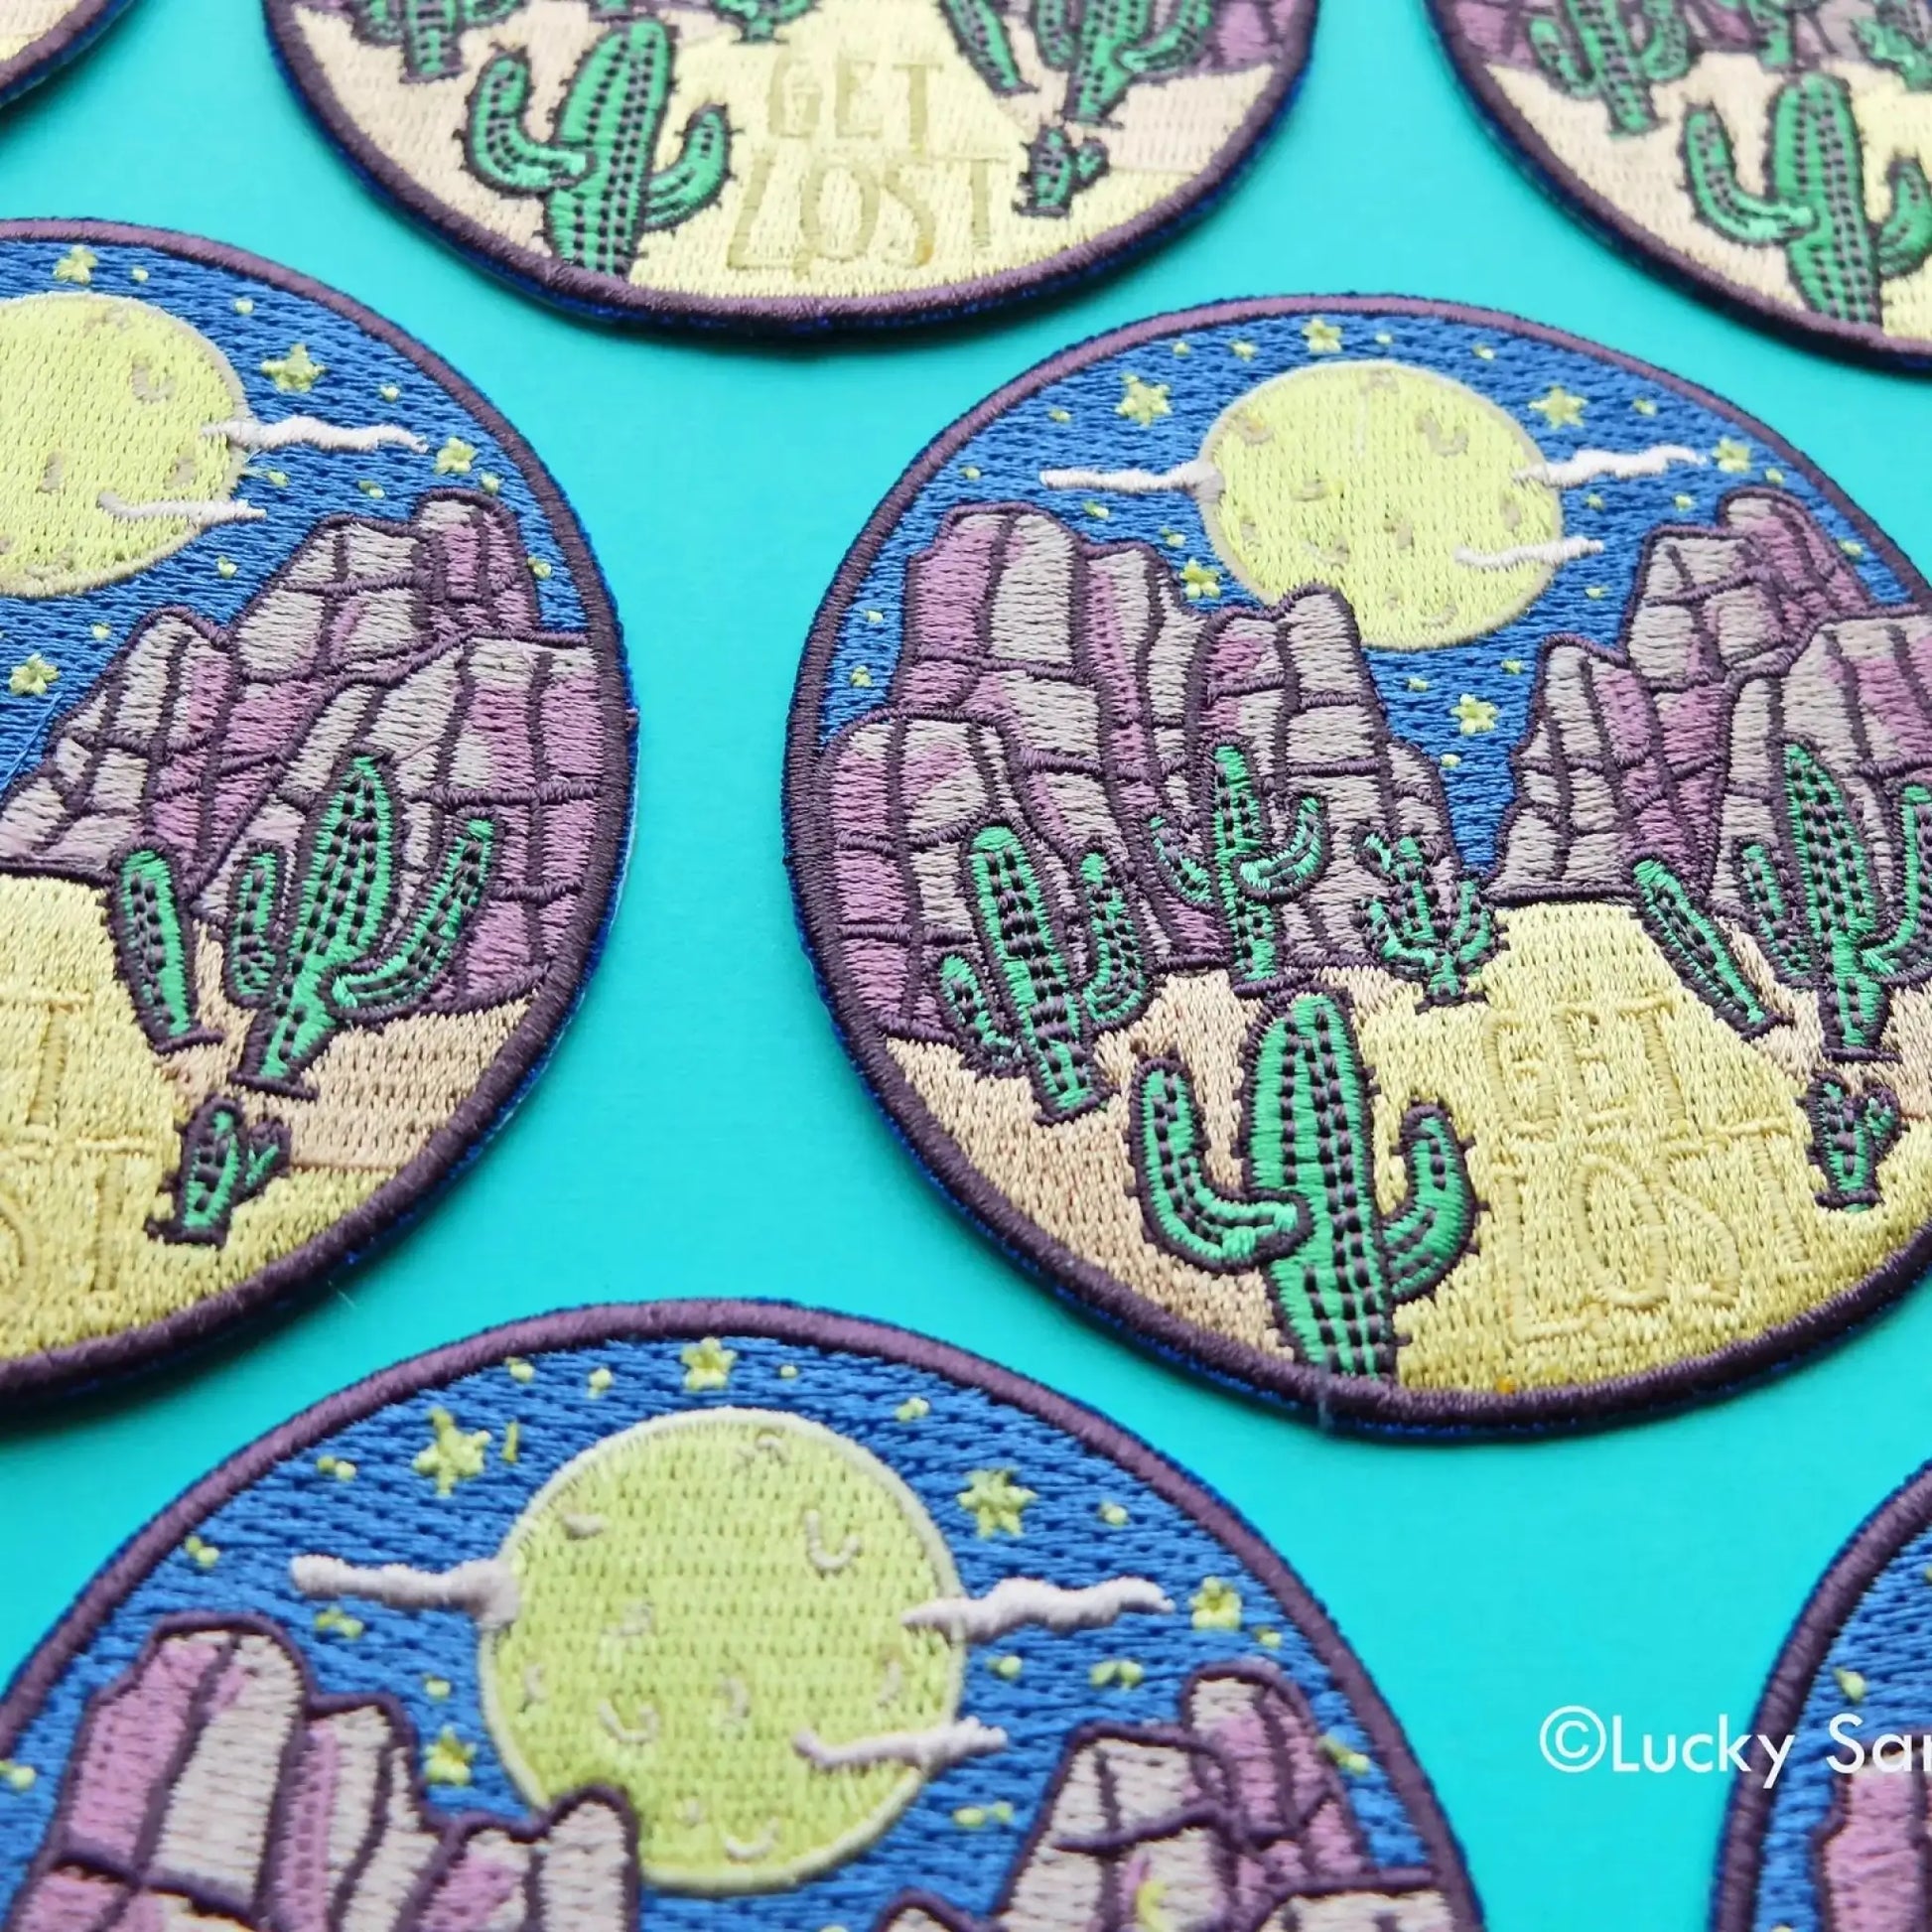 Desert Night Get Lost Embroidered Patch